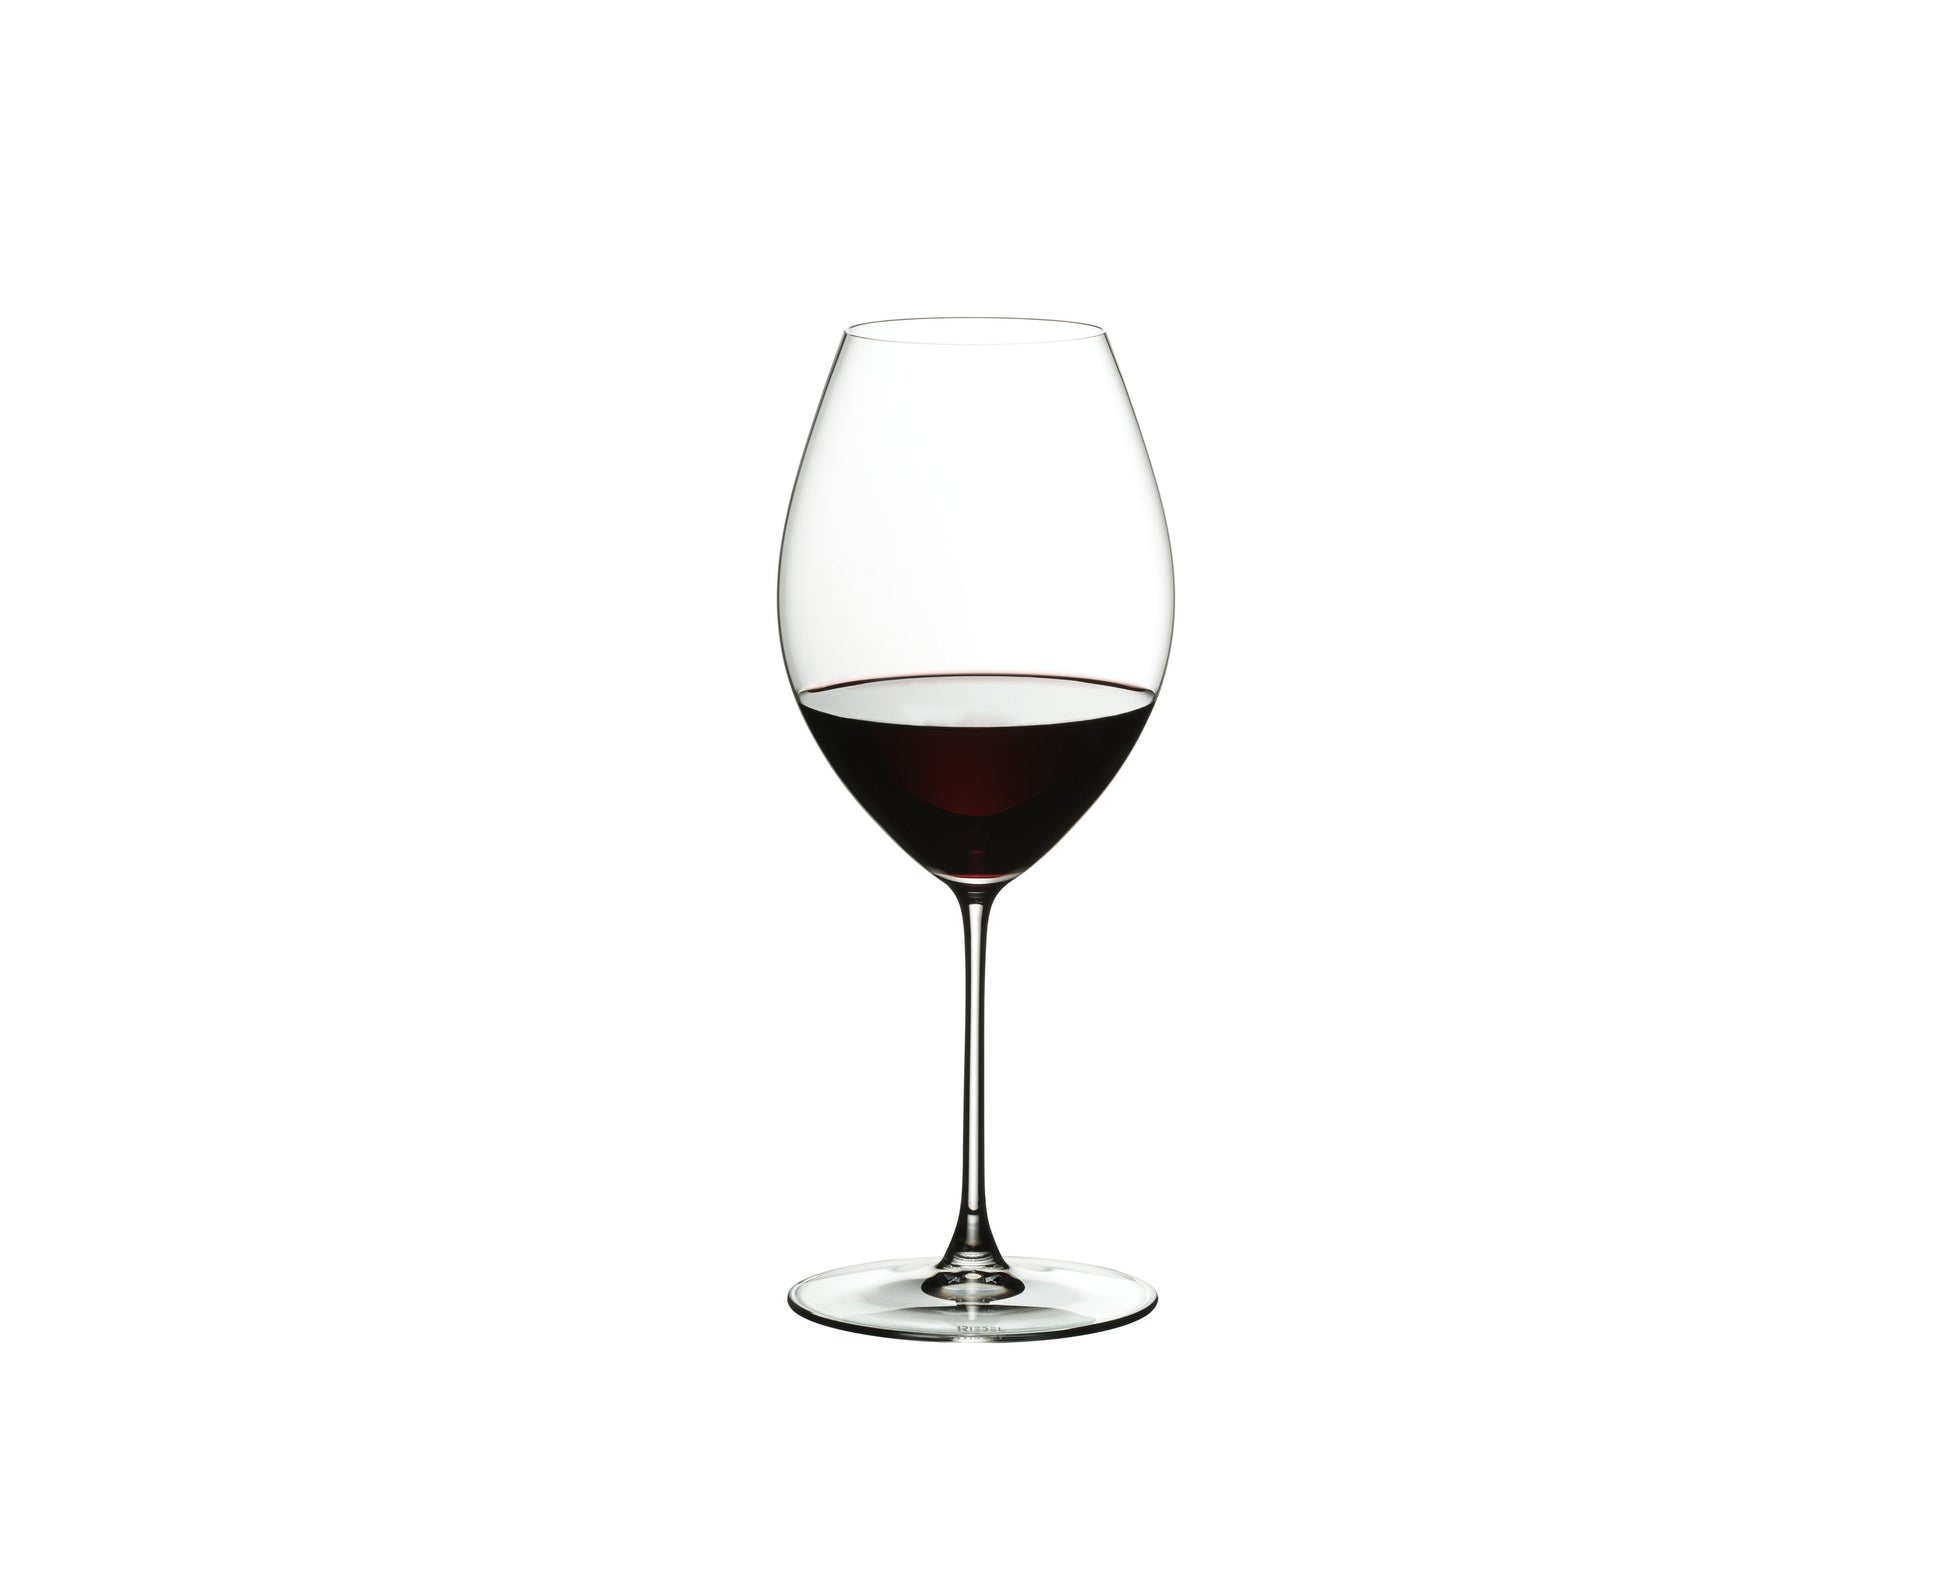 RIEDEL Veritas Restaurant Old World Syrah x 6 glasses - Premium Accessory from RIEDEL - Shop now at Whiskery